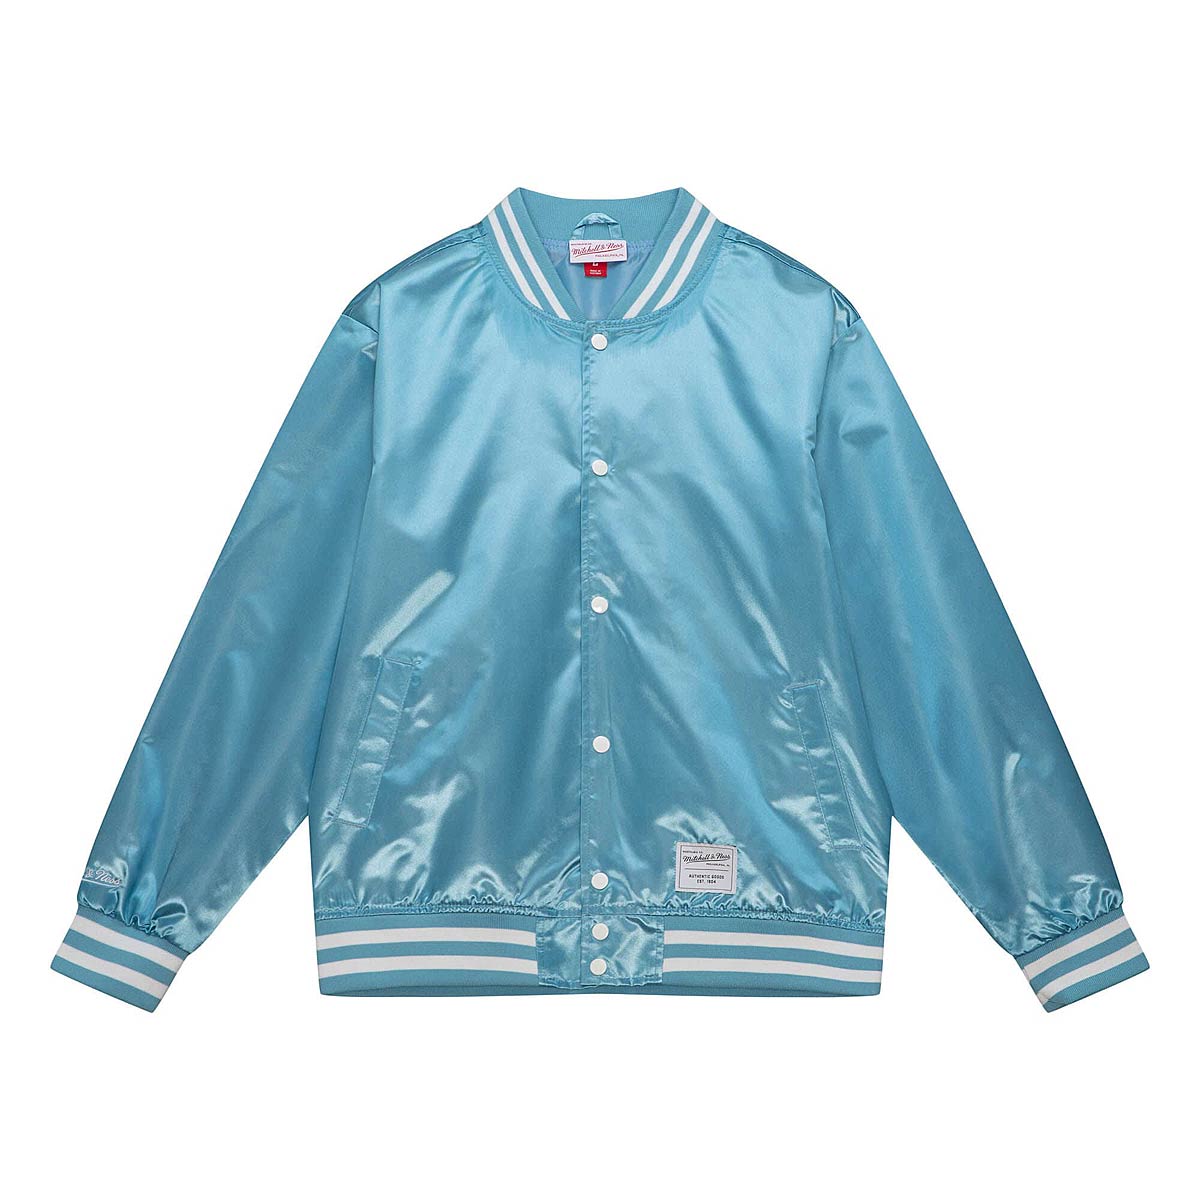 Image of Mitchell And Ness M&n Branded Satin Jacket, Light Blue